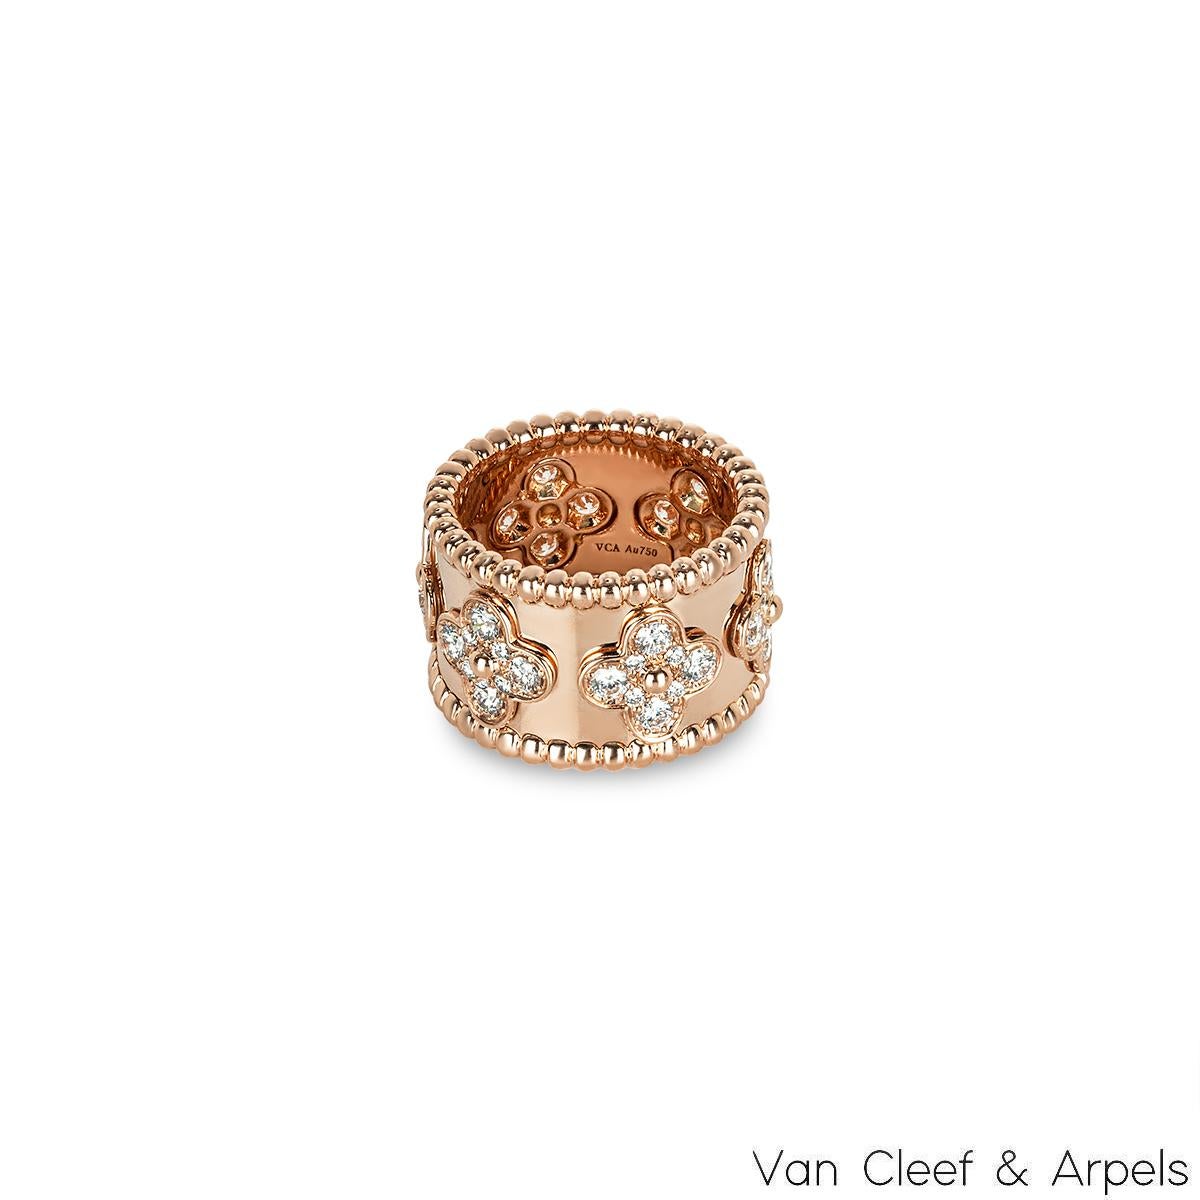 Van Cleef & Arpels Rose Gold Diamond Perlee Clovers Medium Ring In Excellent Condition For Sale In London, GB